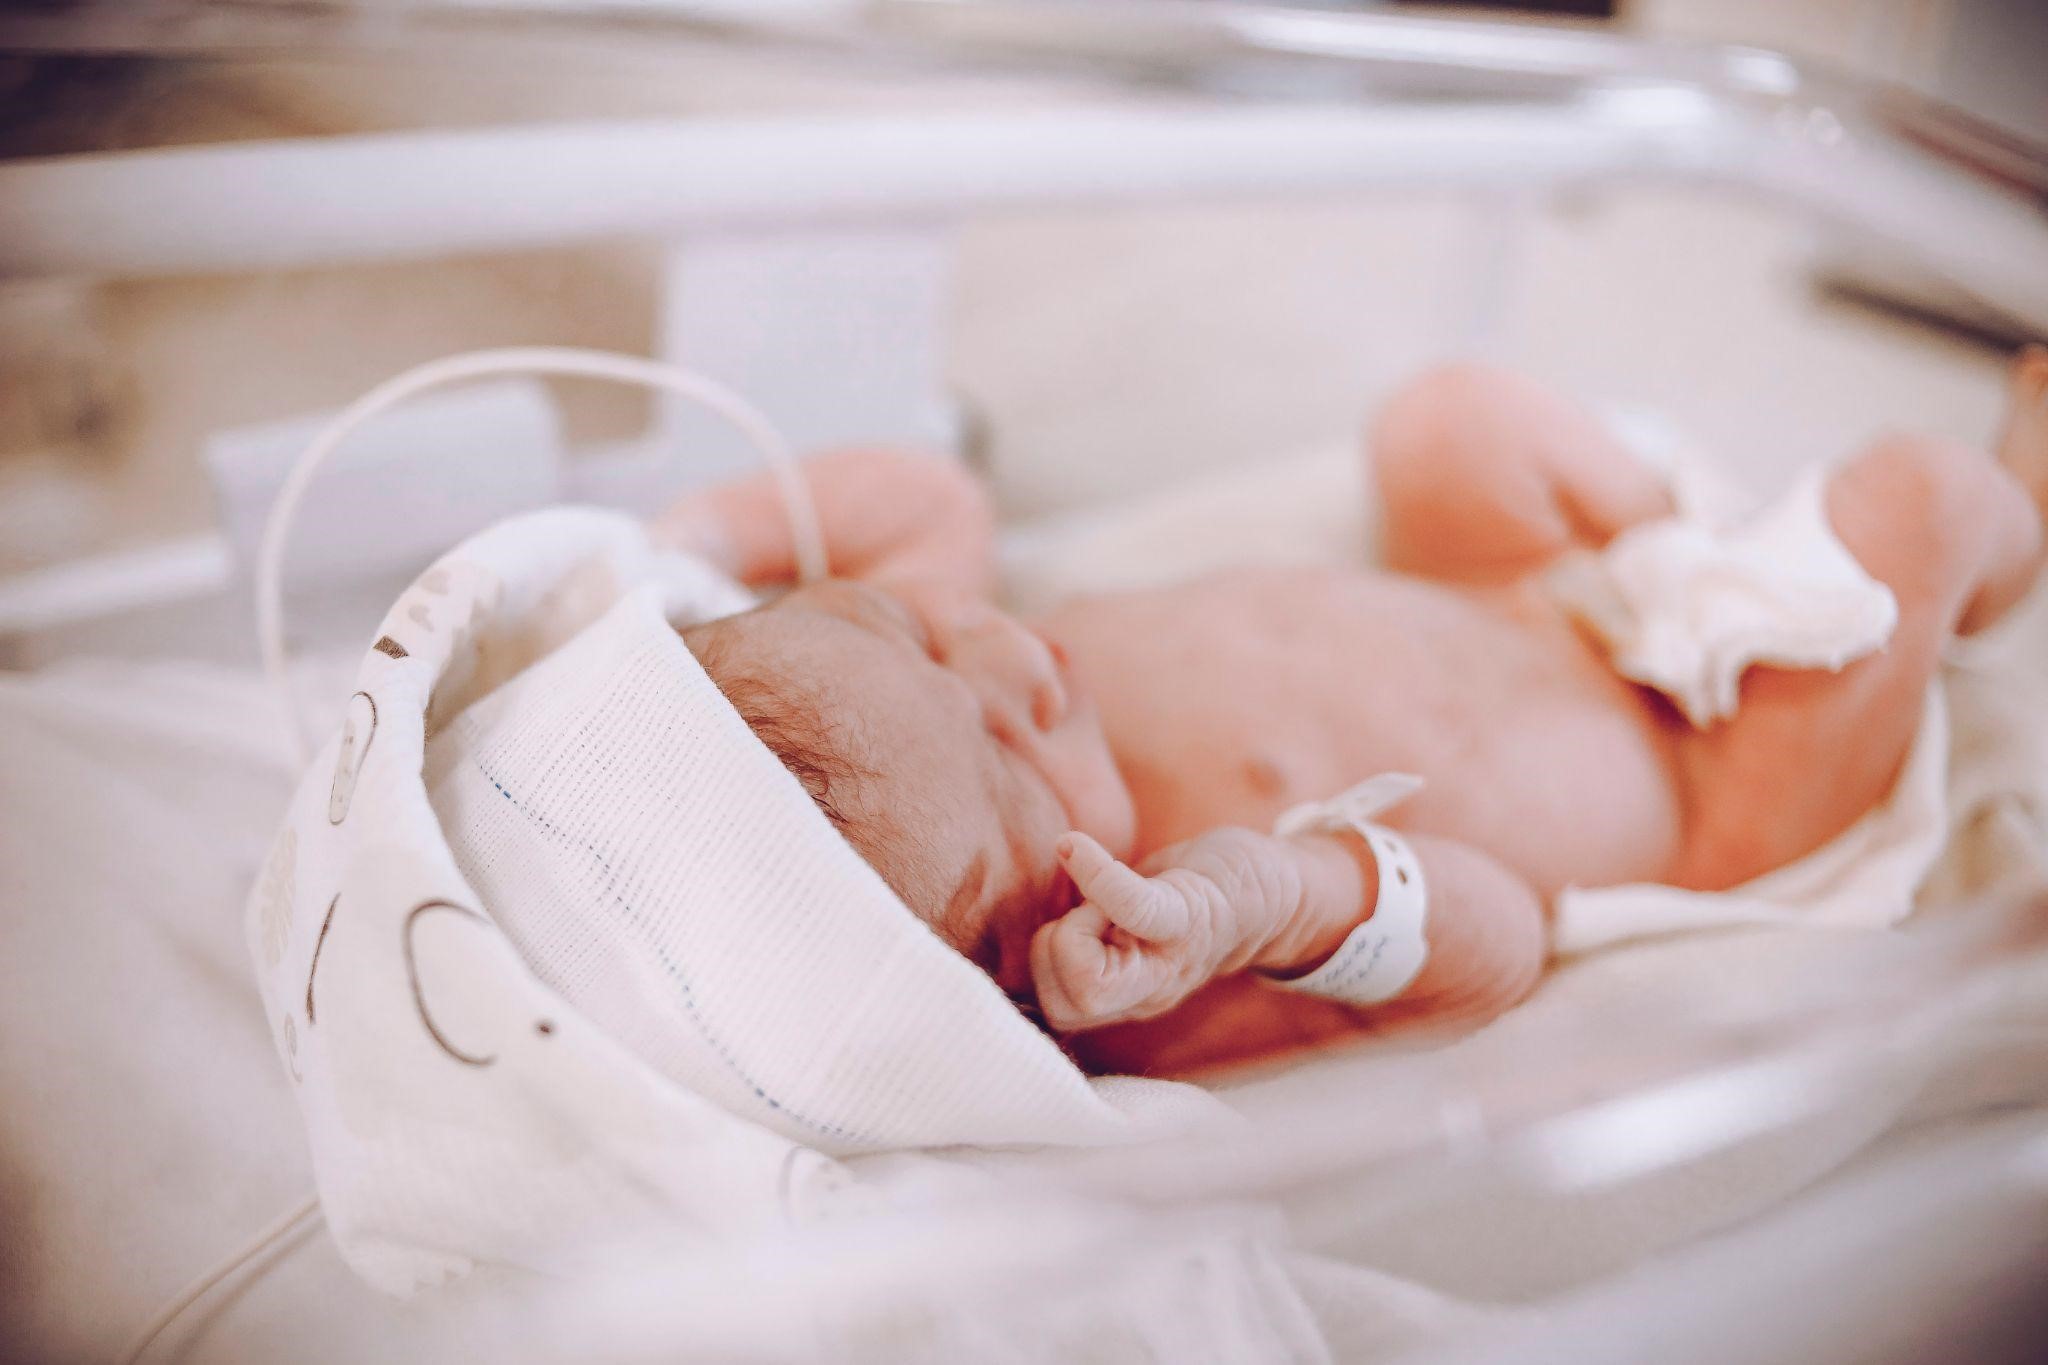 What Is The Most Common Birth Injury?